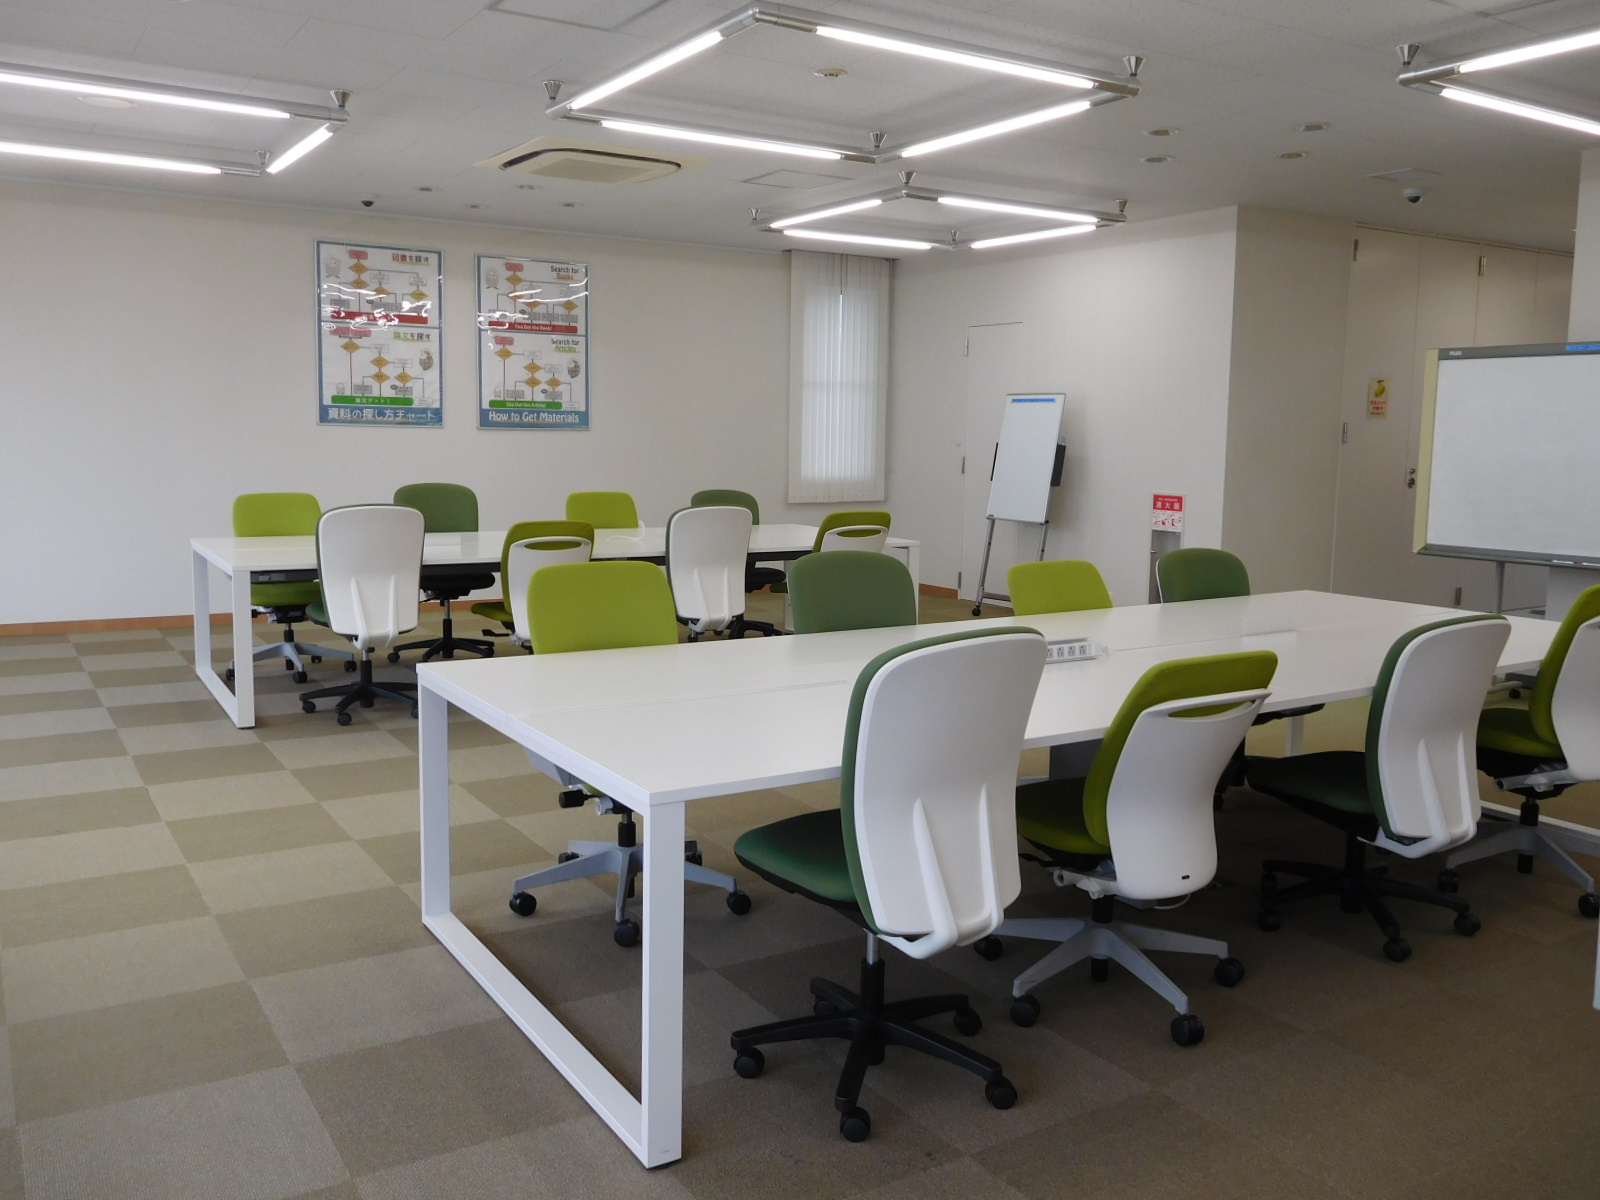 Group Study Space 1